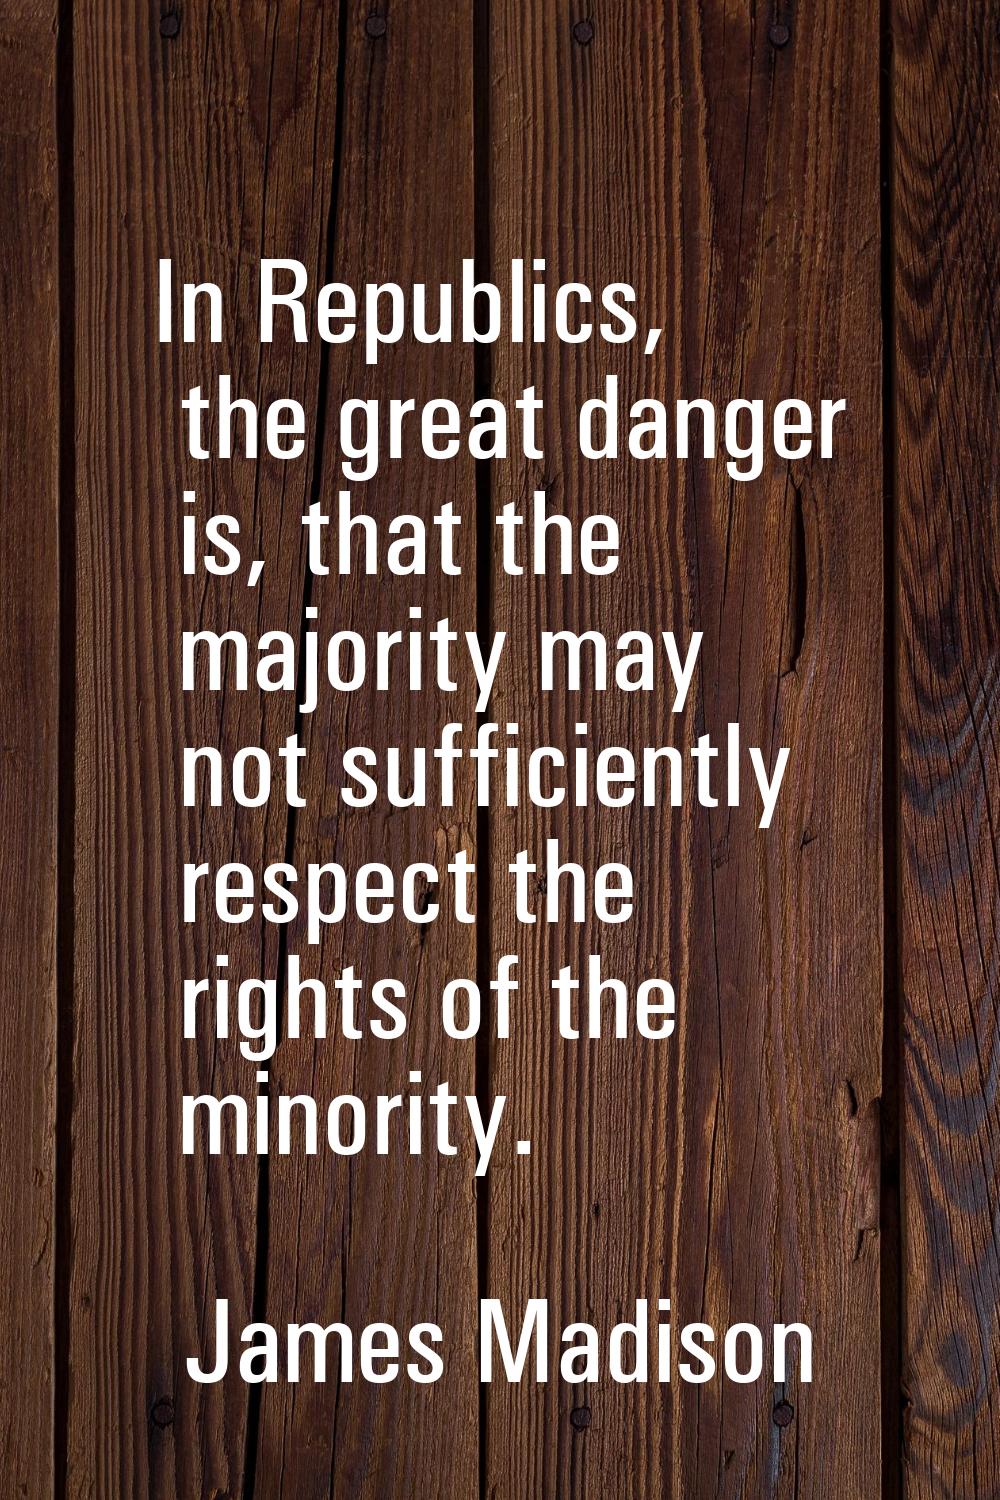 In Republics, the great danger is, that the majority may not sufficiently respect the rights of the